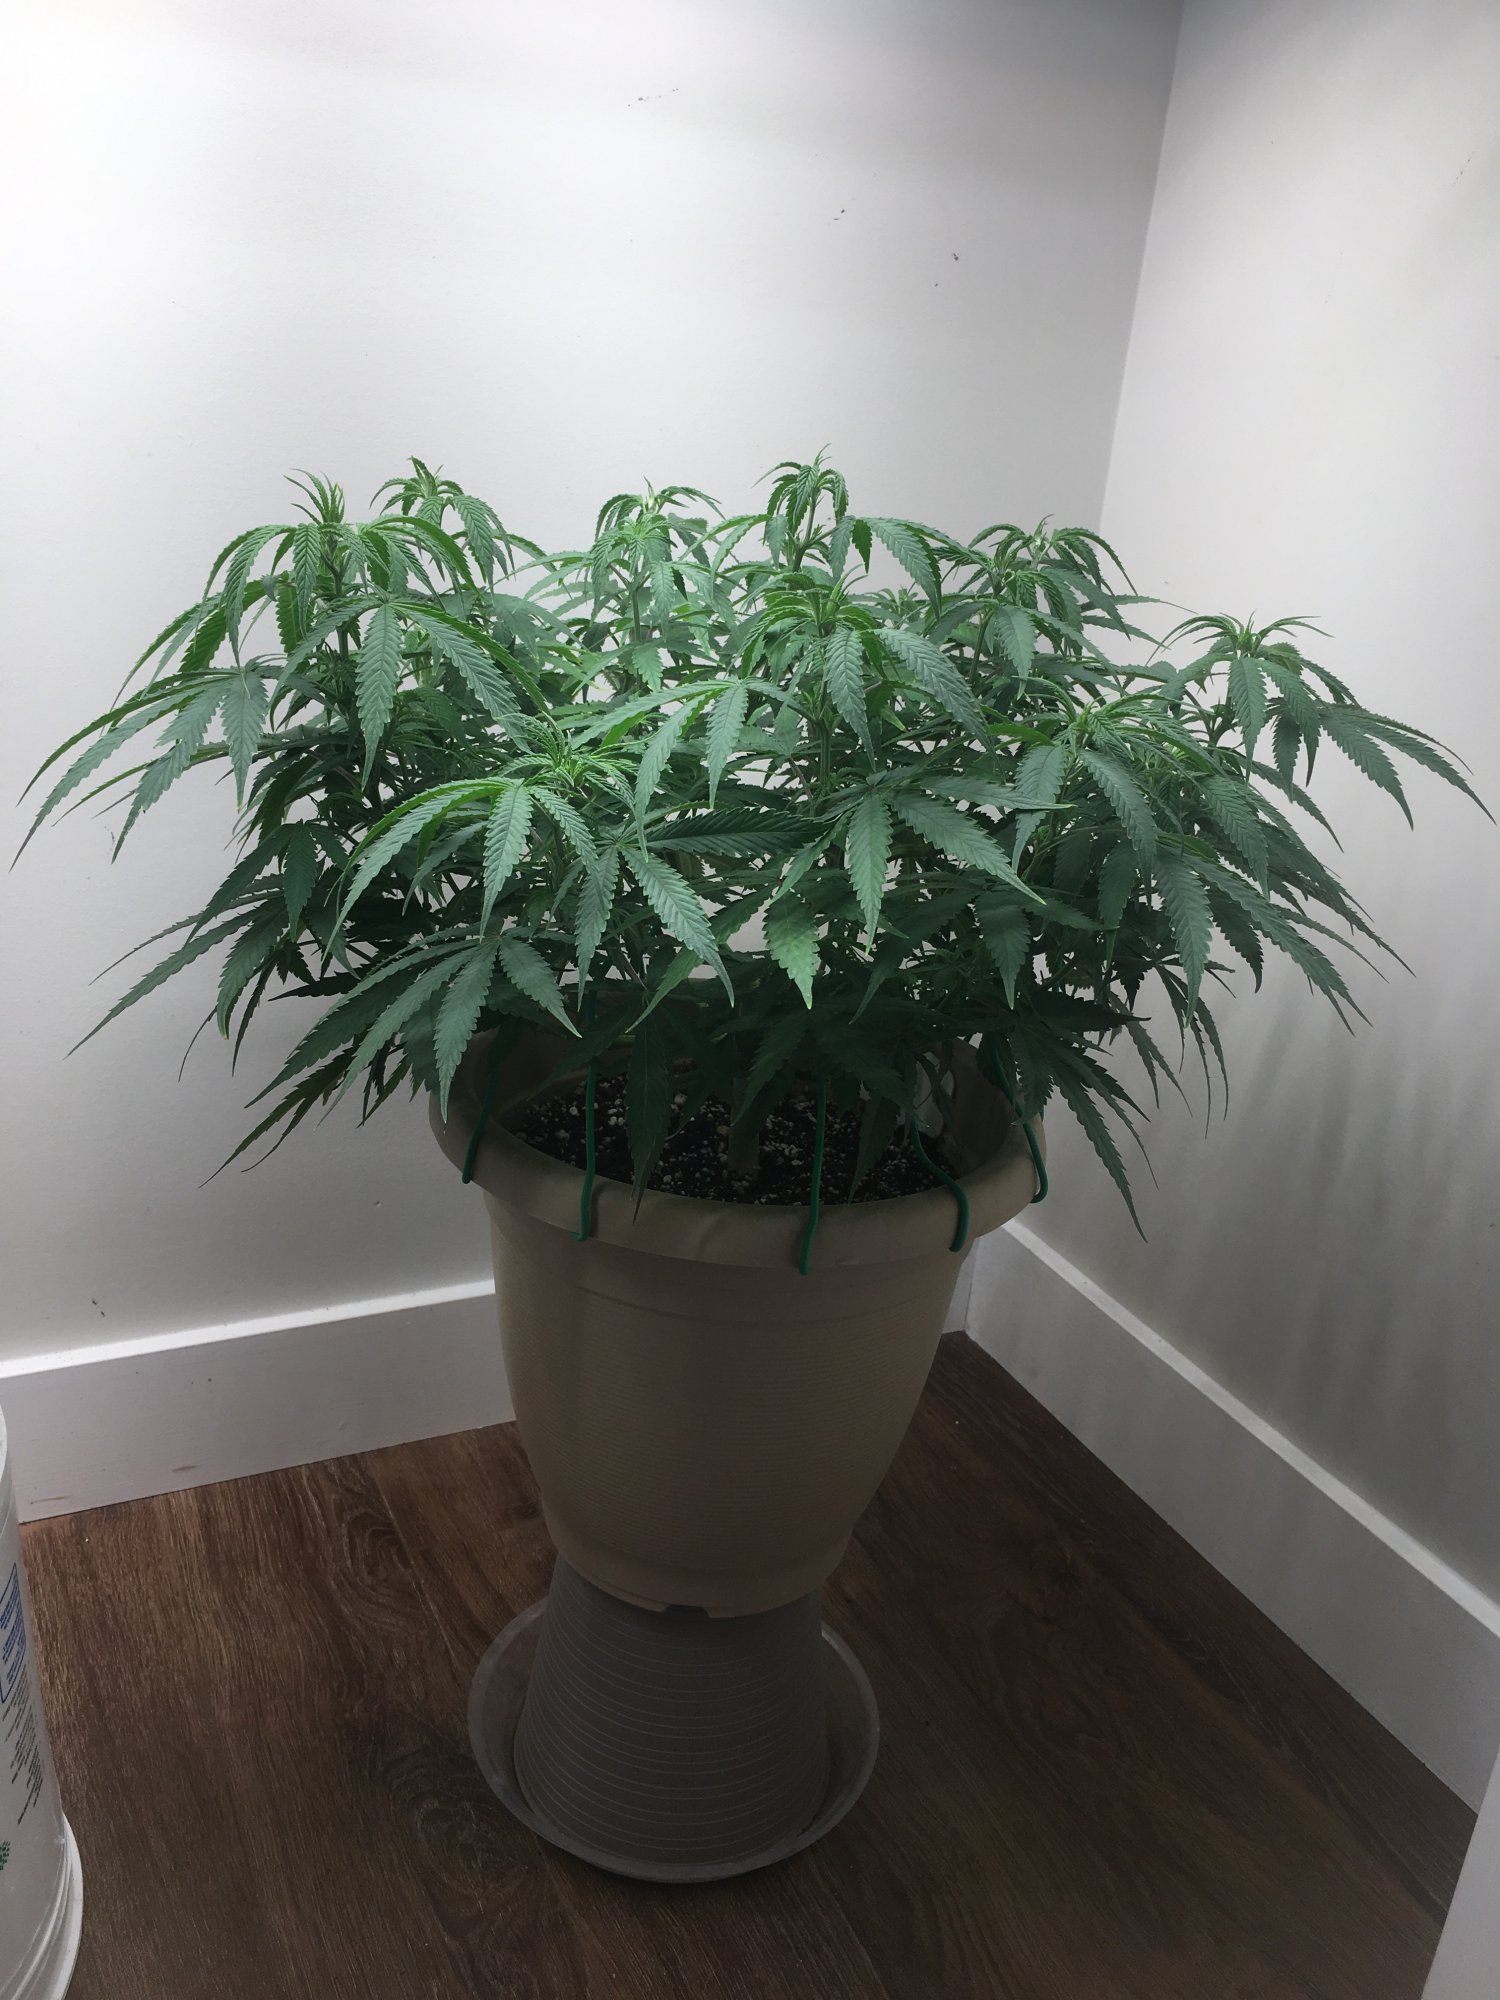 Need help with transplanting a plant 2